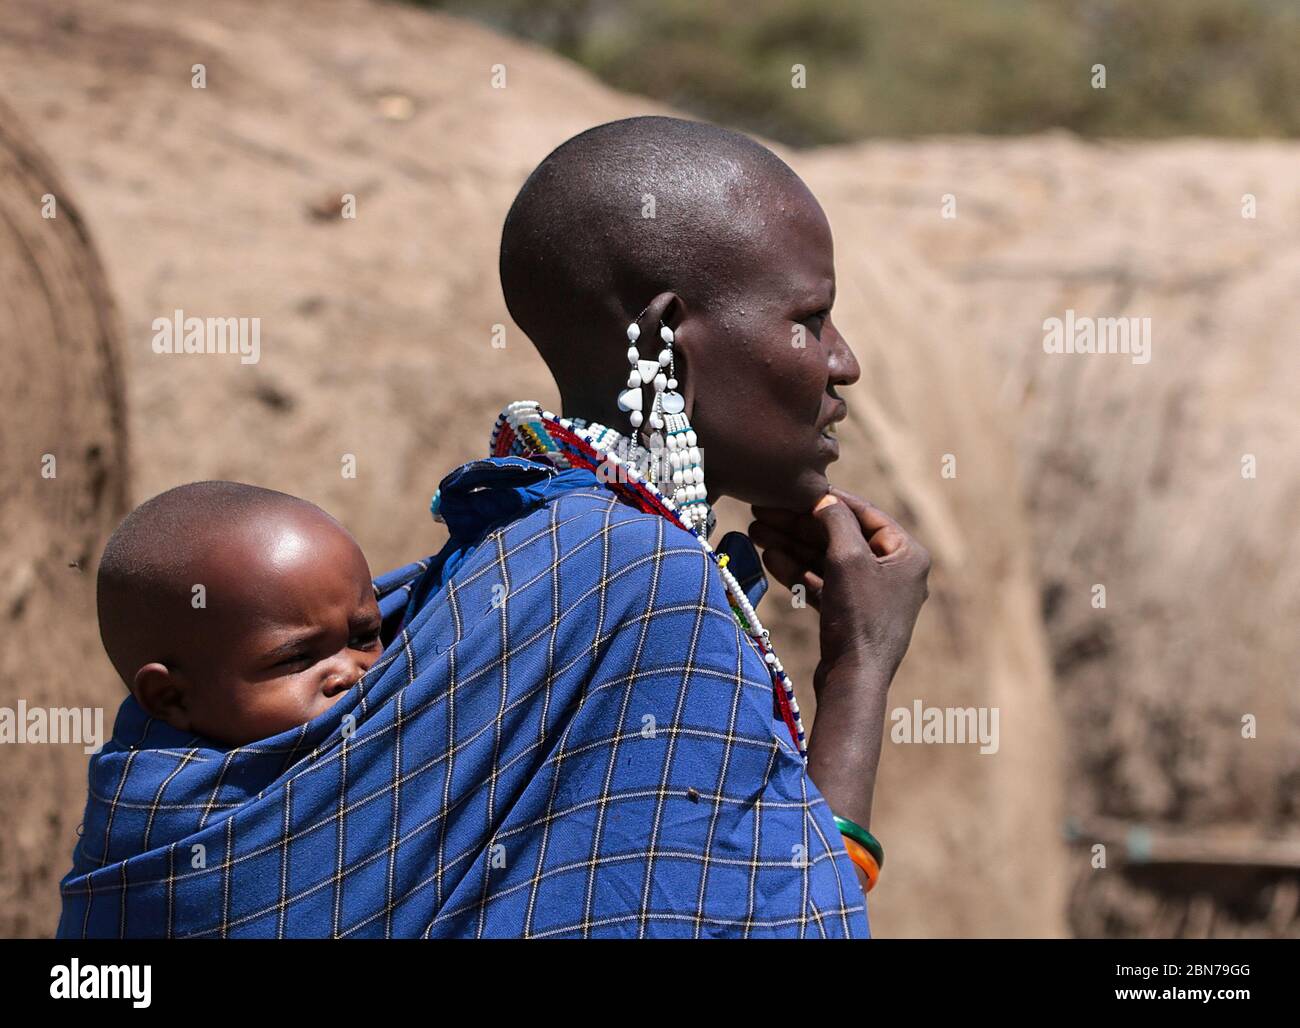 Maasai Woman with her baby. Maasai is an ethnic group of semi-nomadic people. Photographed in Tanzania Stock Photo